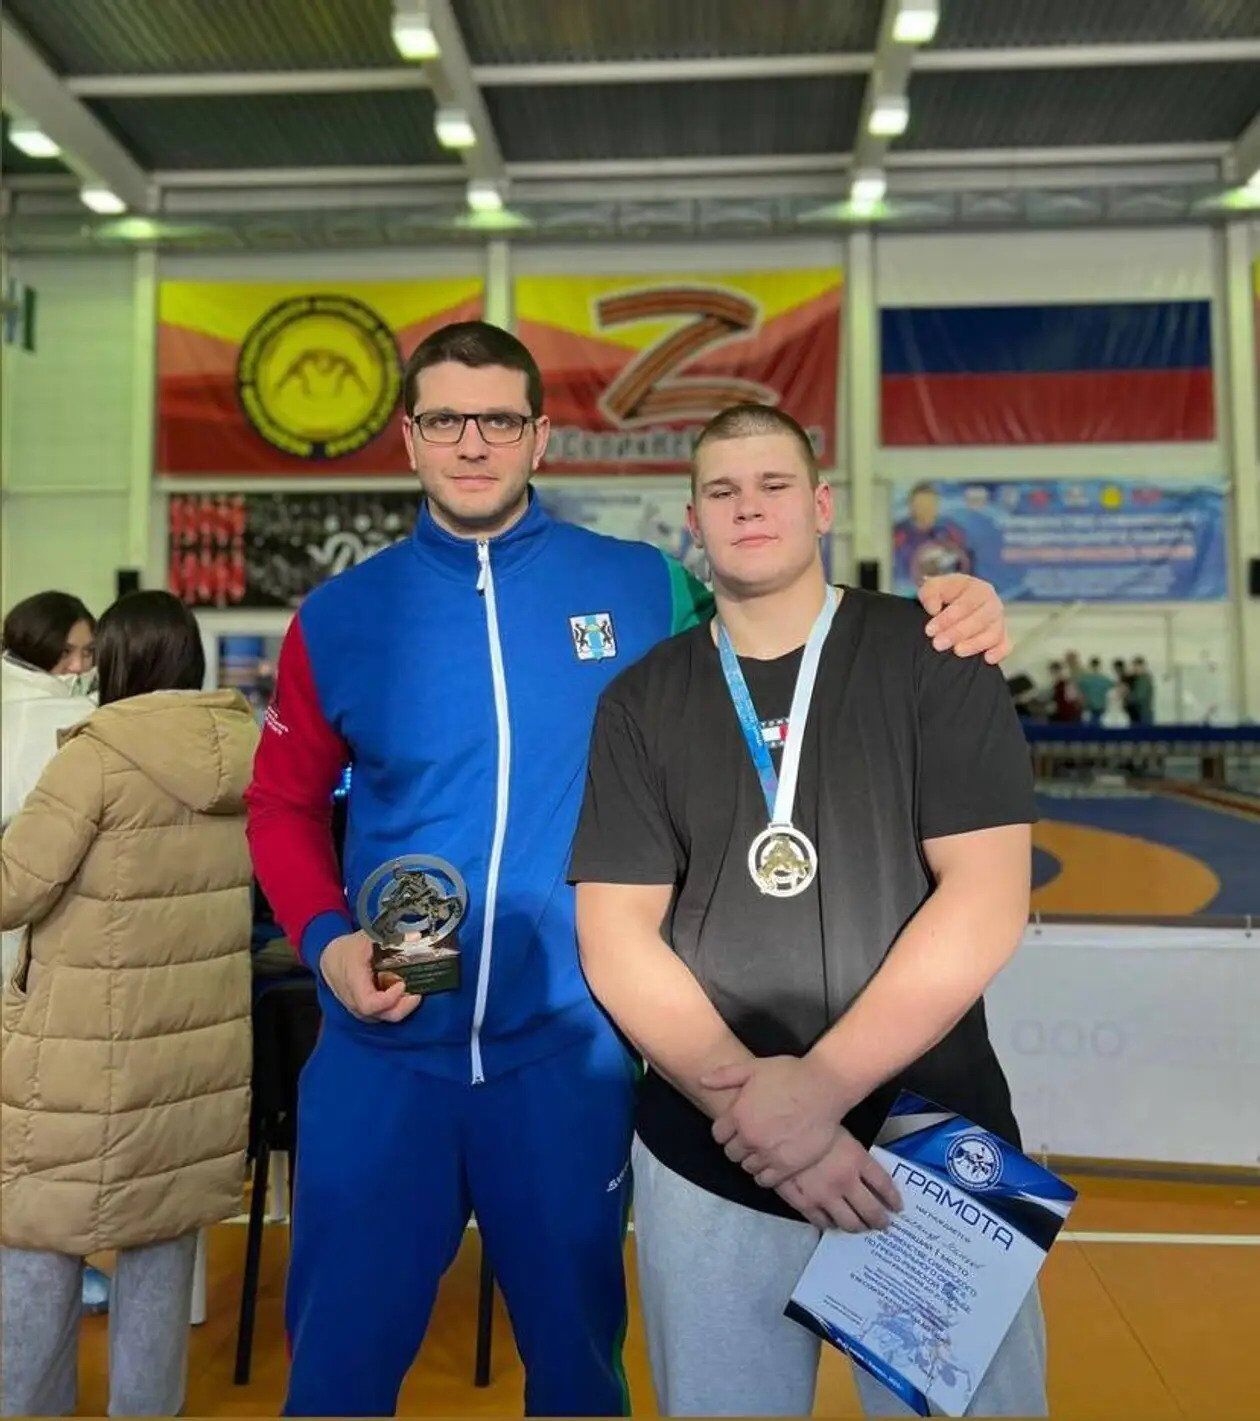 The International Federation spat on Ukraine by allowing a Russian champion to post photos with ''Z'' 